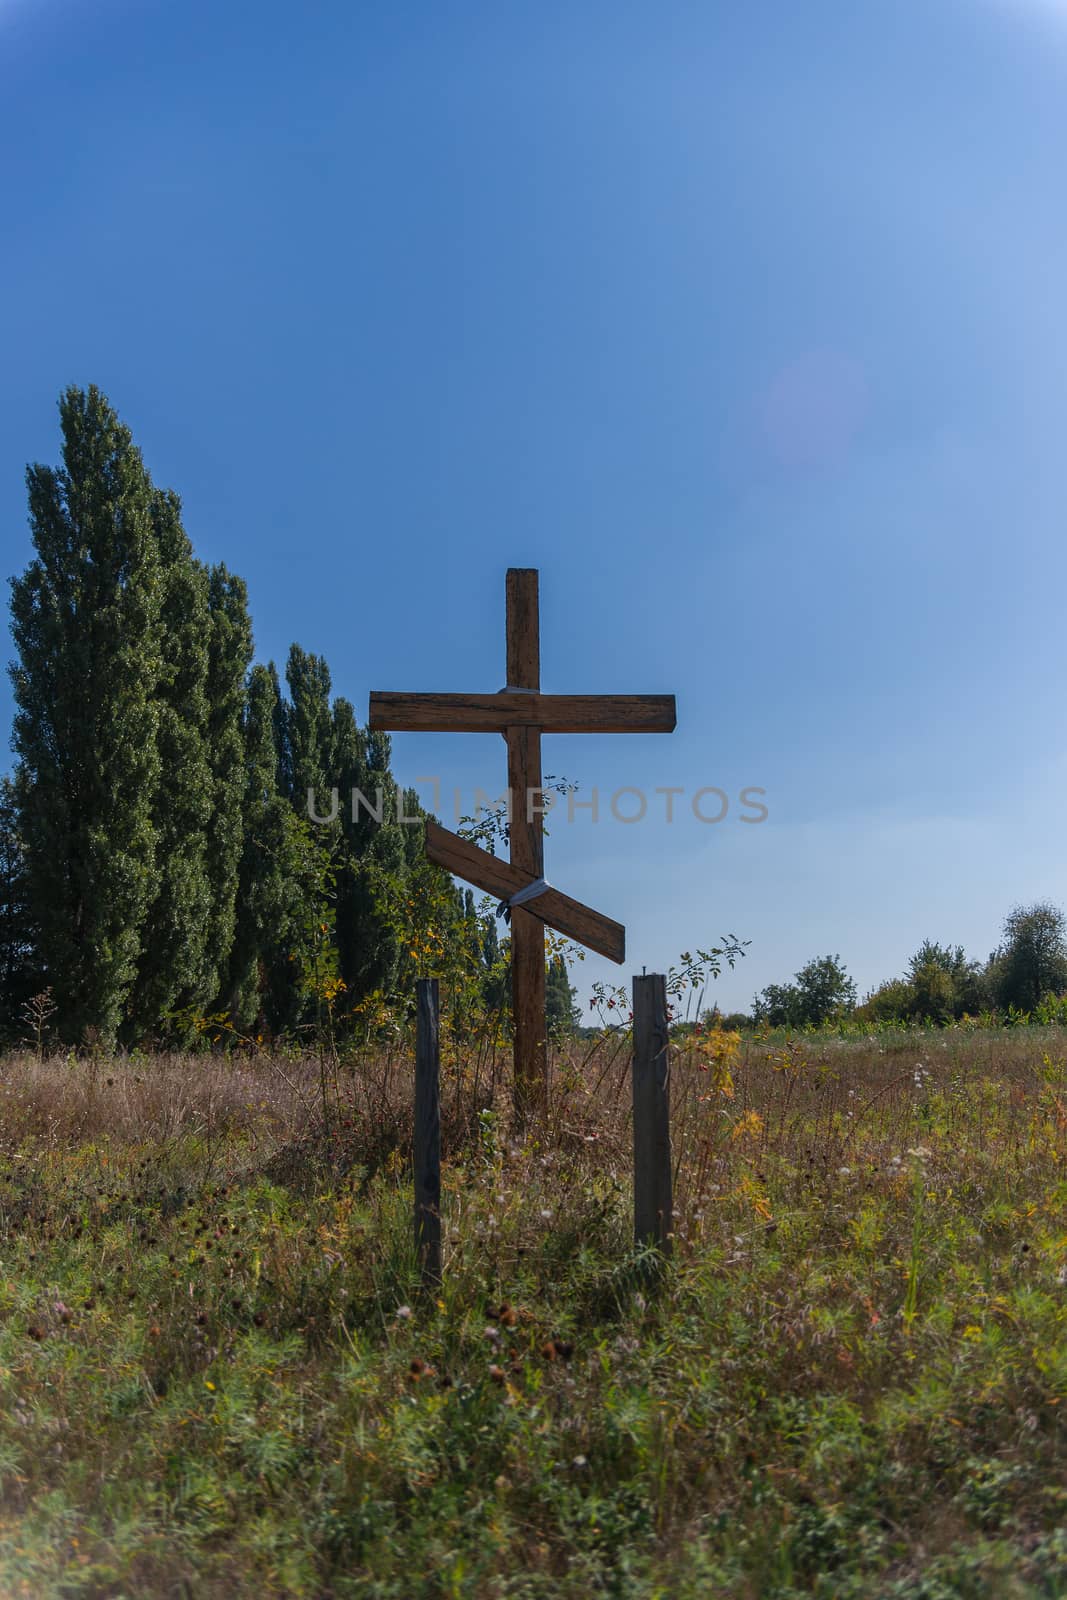 A wooden cross in the middle of the field. Christian symbol.